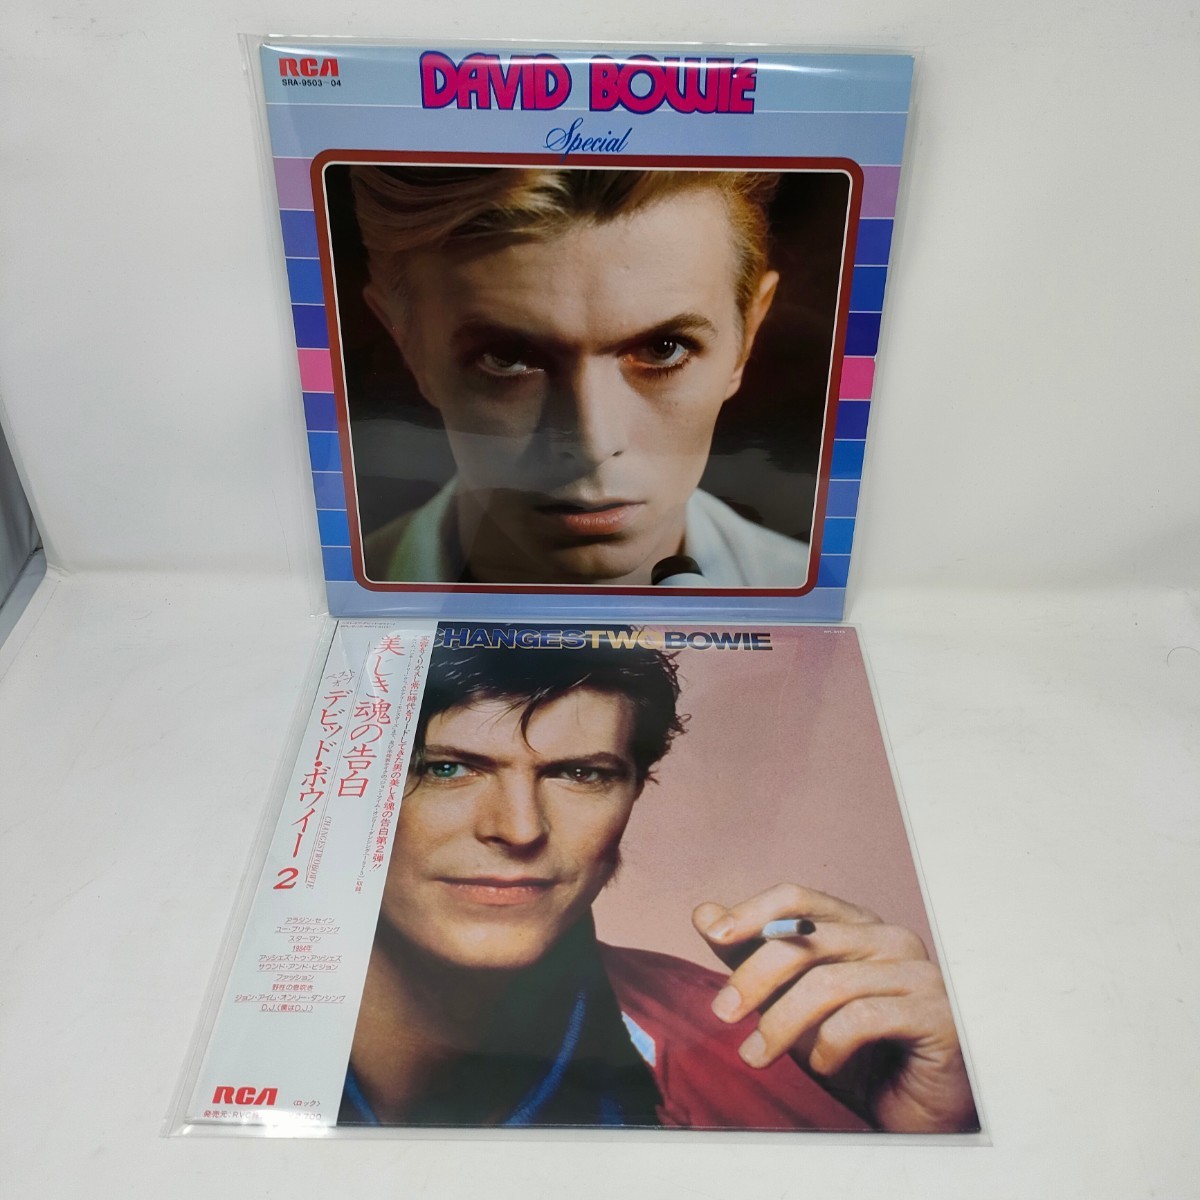 LP 2枚　デヴィッド・ボウイ　DAVID BOWIE　Special （SLA9503-04 ）/ changes two bowie 美しき魂の告白 （RPL8113 ）即決　送料込み